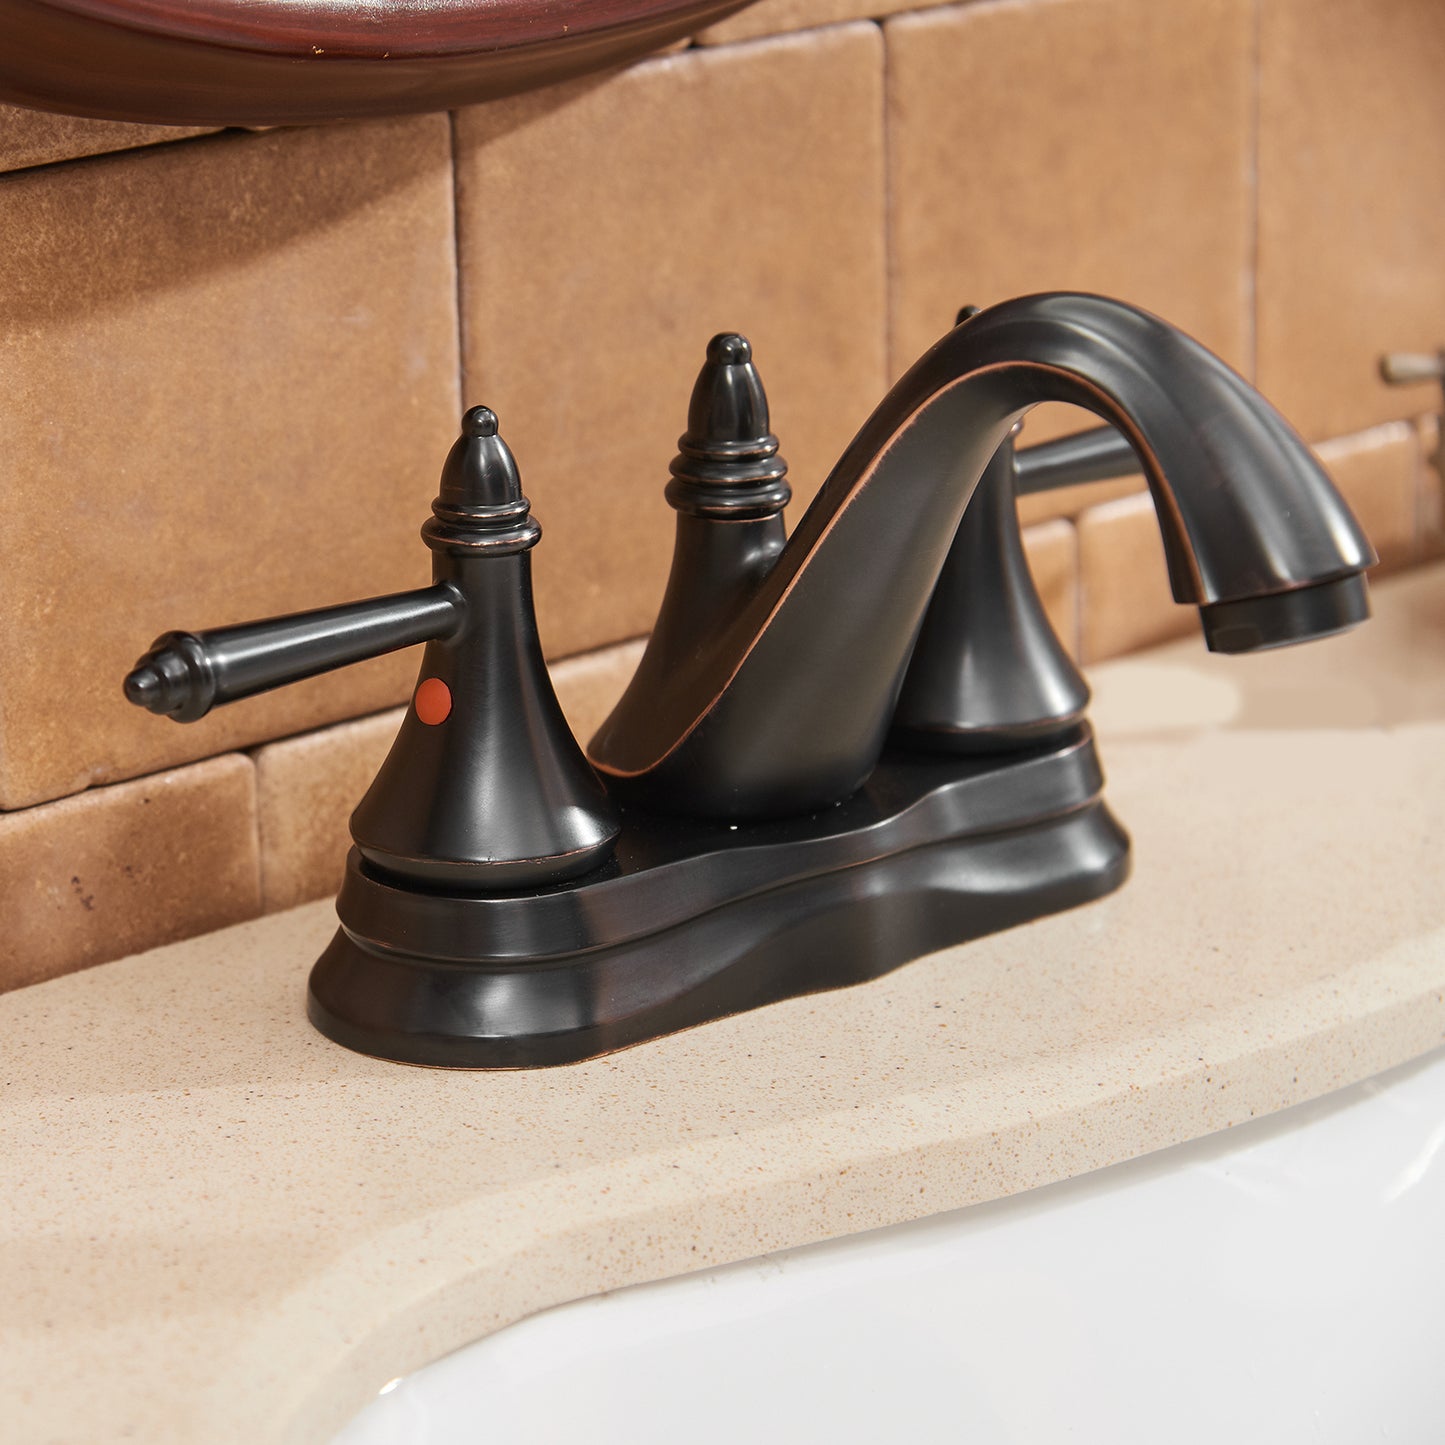 Oil Rubbed Bronze Double Handle Bathroom Faucet with Pop-up Drain Assembly for 4-inch Centerset Sink